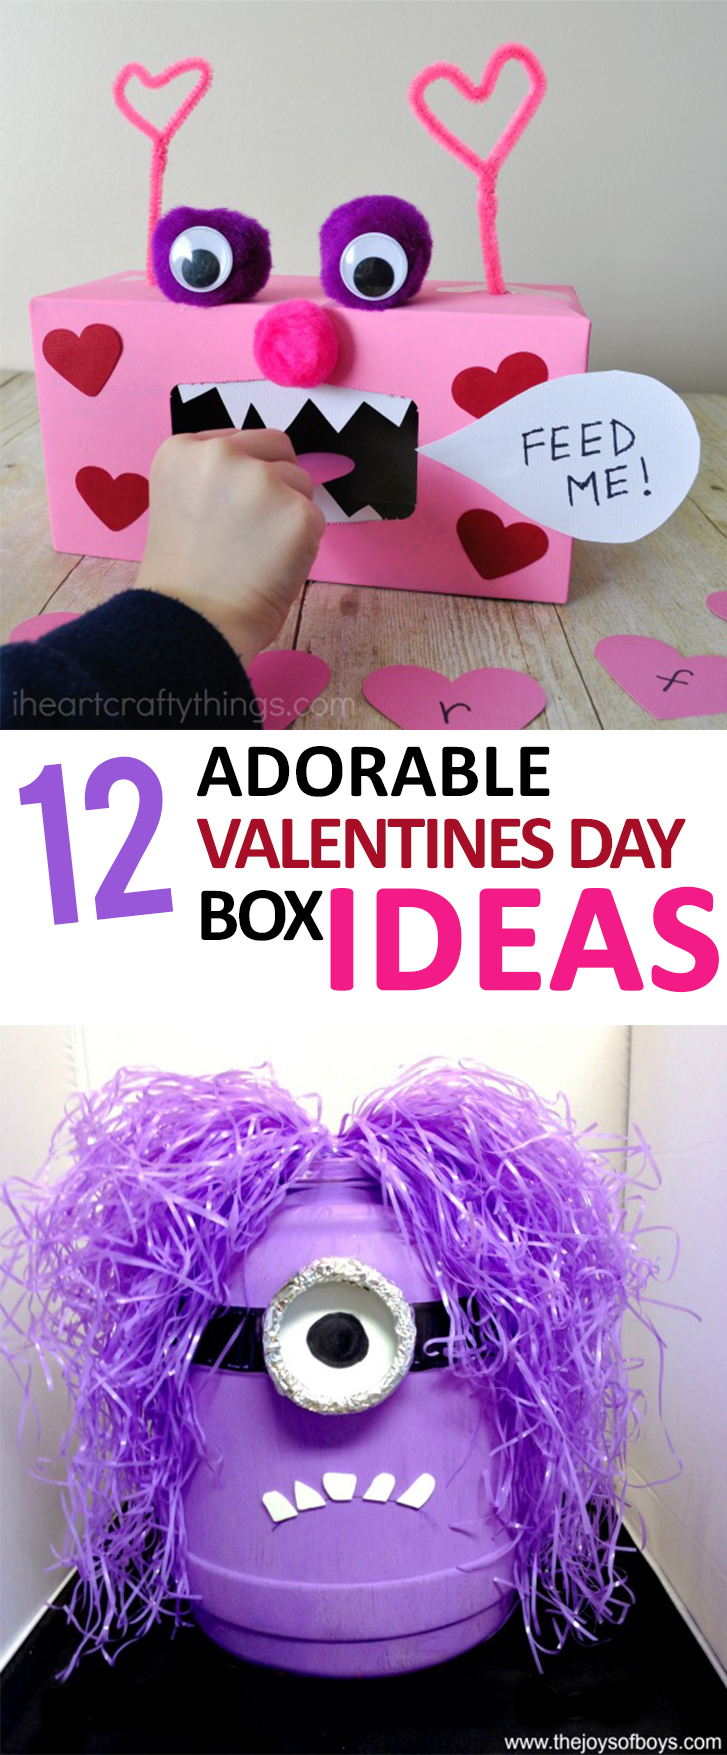 12 adorable valentines day box ideas -